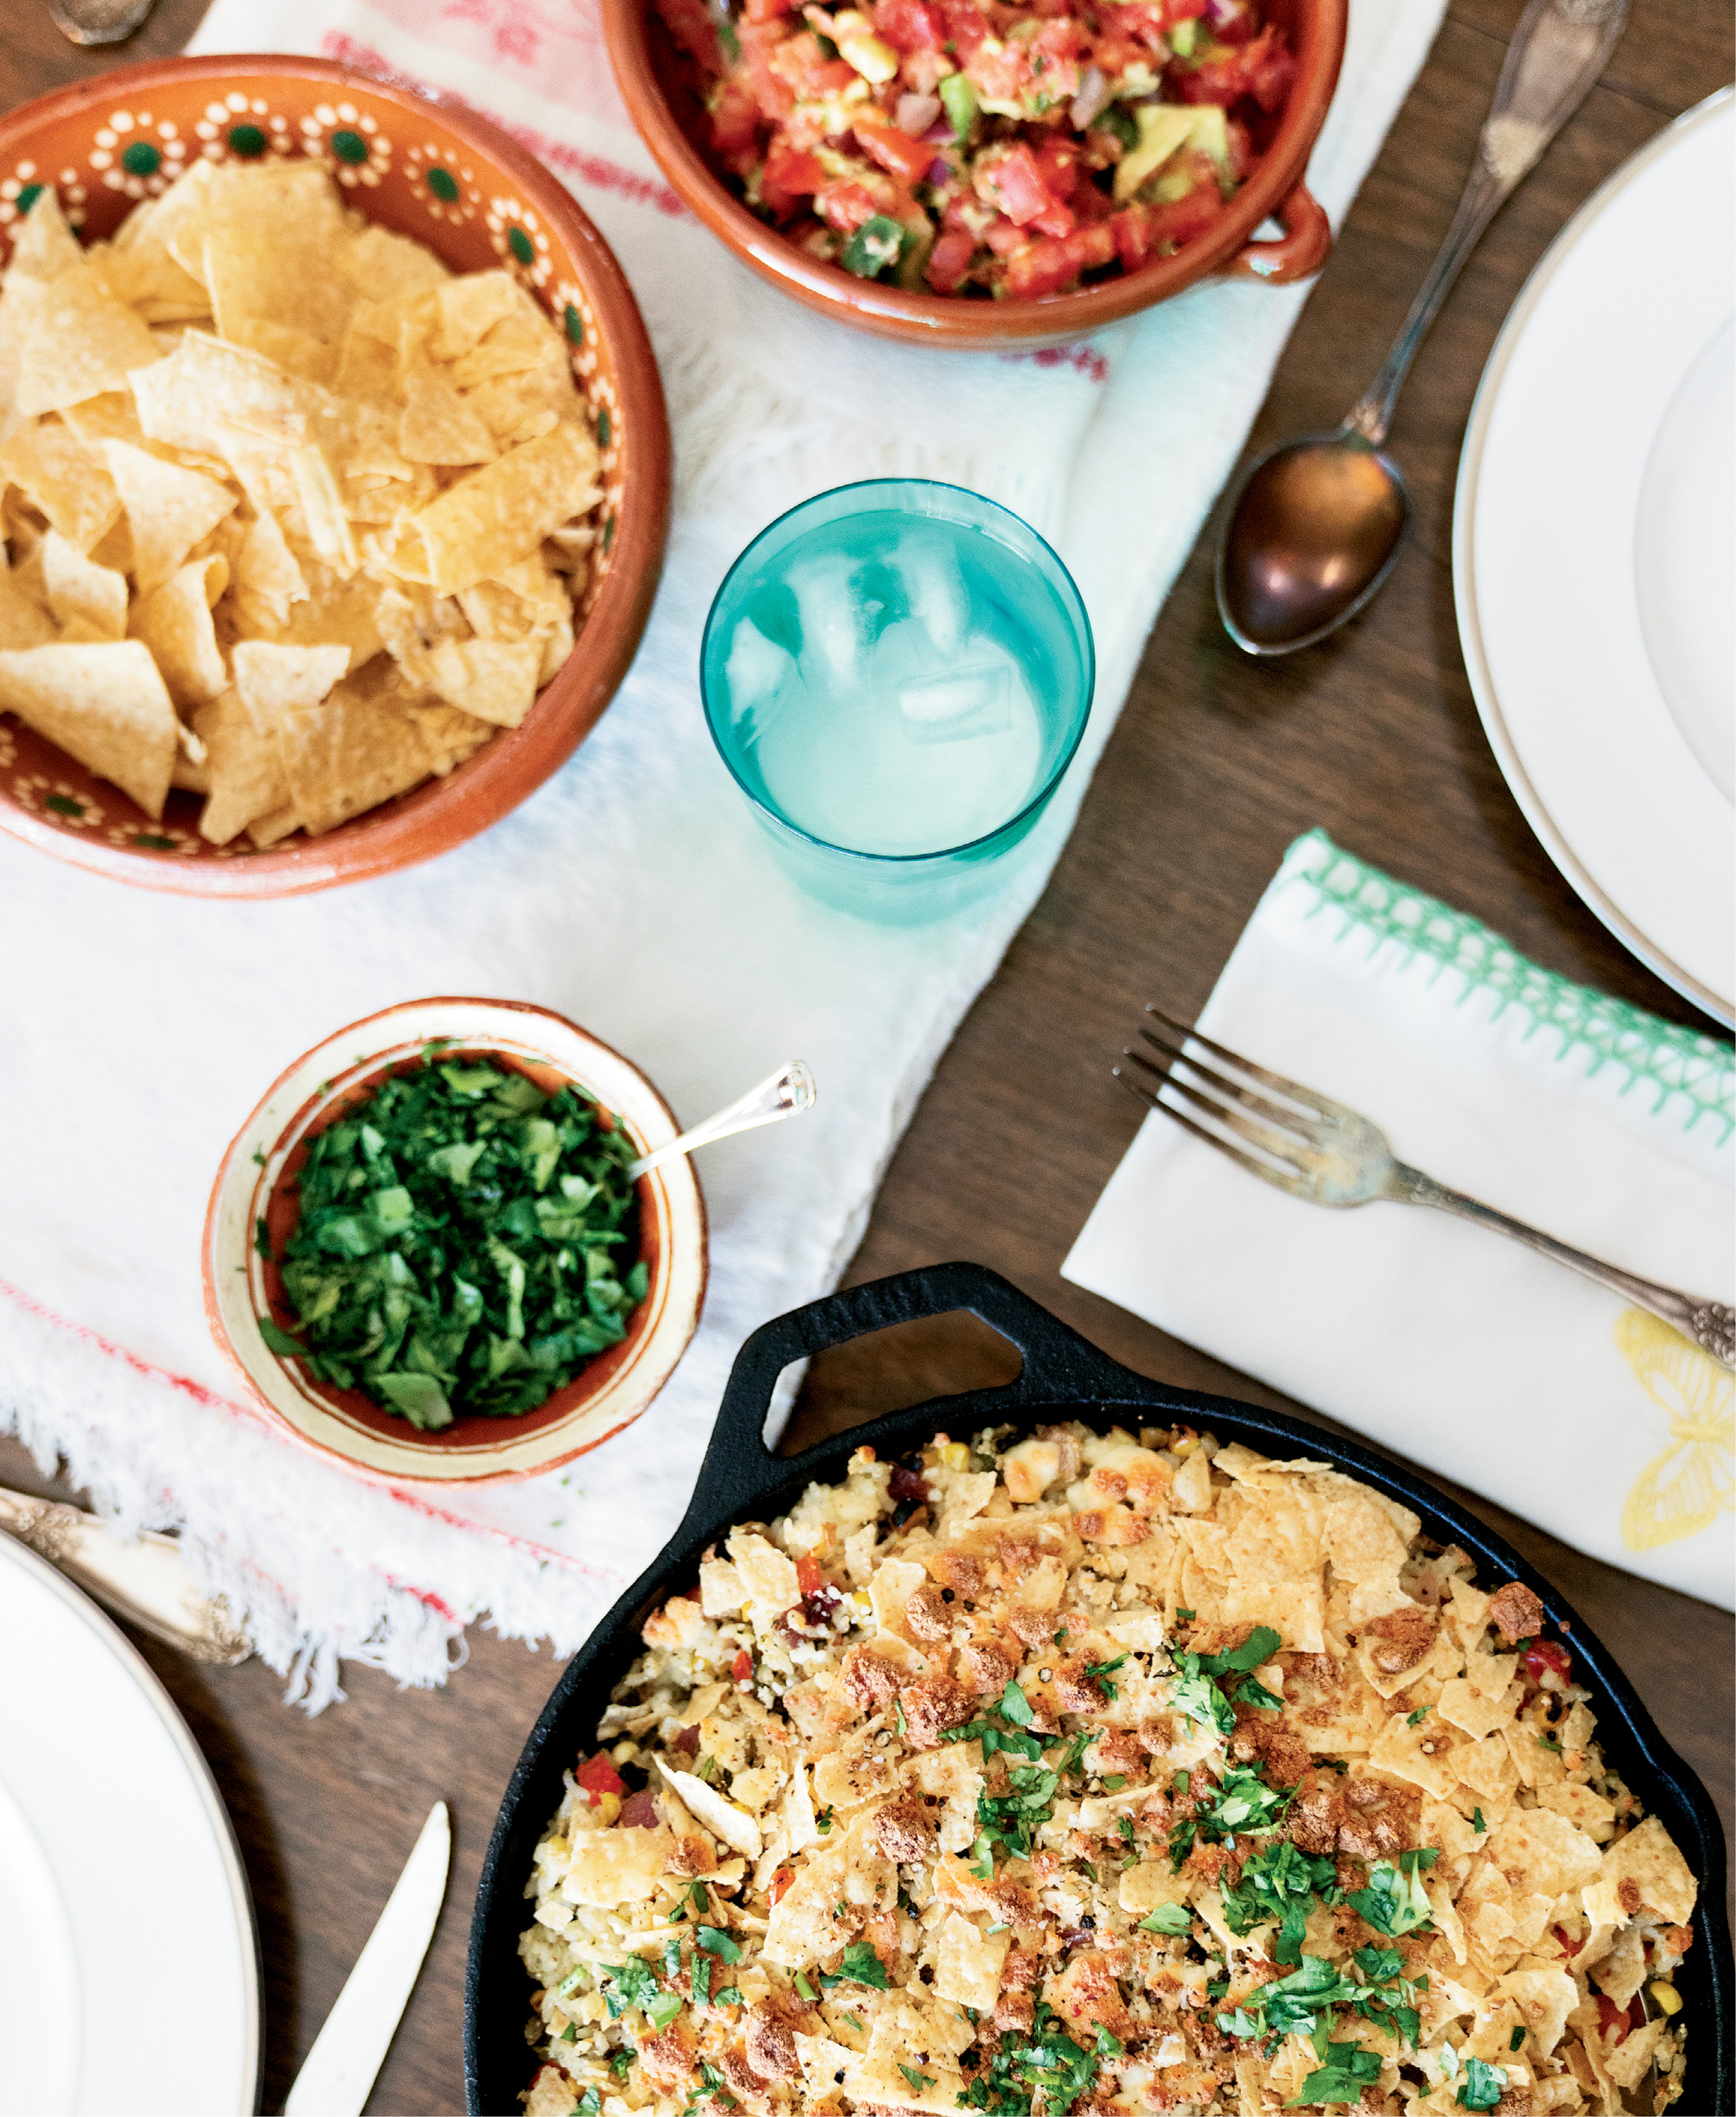 “When we get into a rut, I ask the children to give me a country—Mexico, Italy, China—as a jumping-off point for a dinner plan,” says Morey. Poblano peppers pop in this Mexican-inspired corn and rice dish.